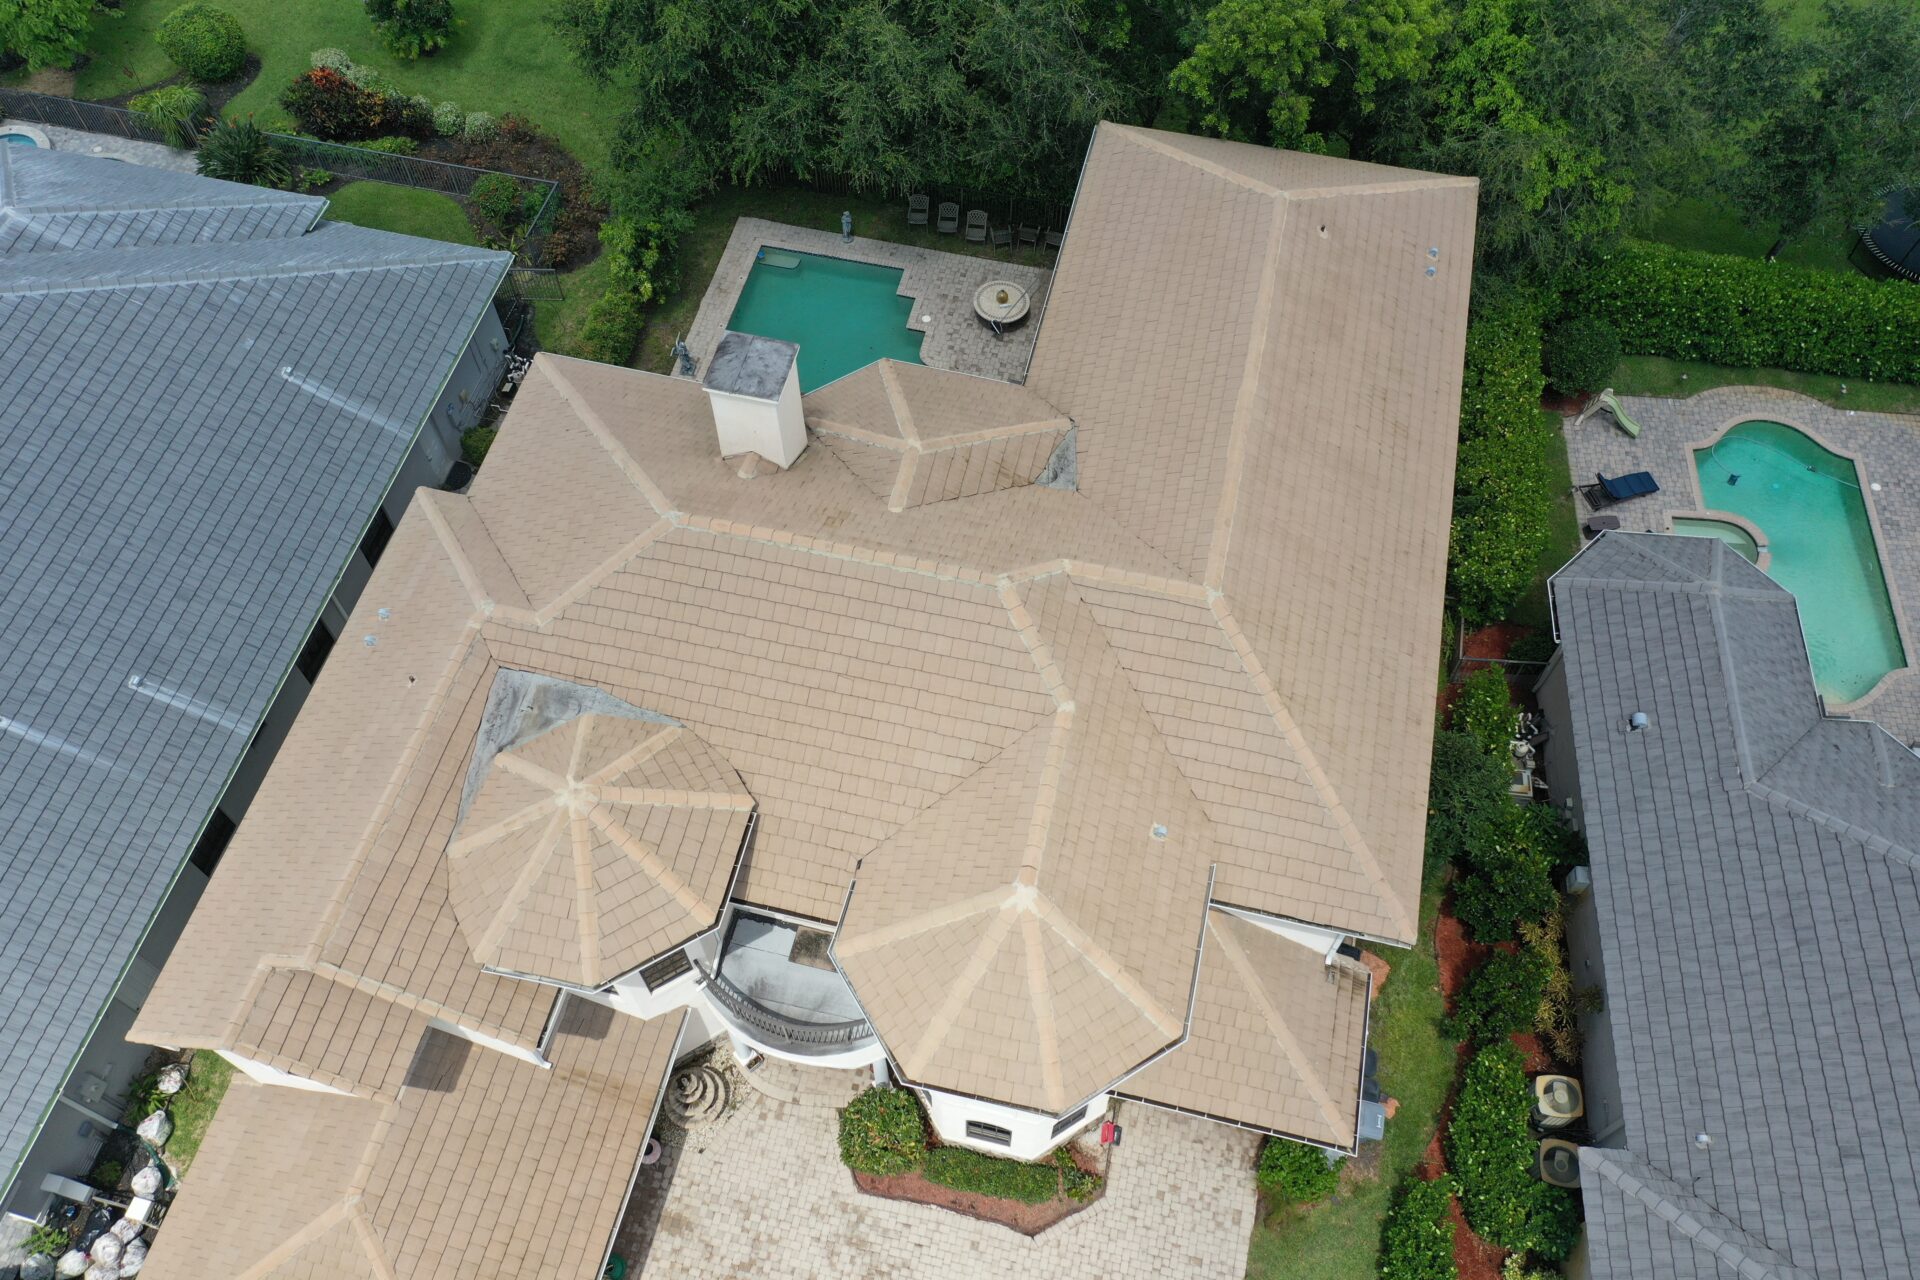 A bird 's eye view of a house with a pool.